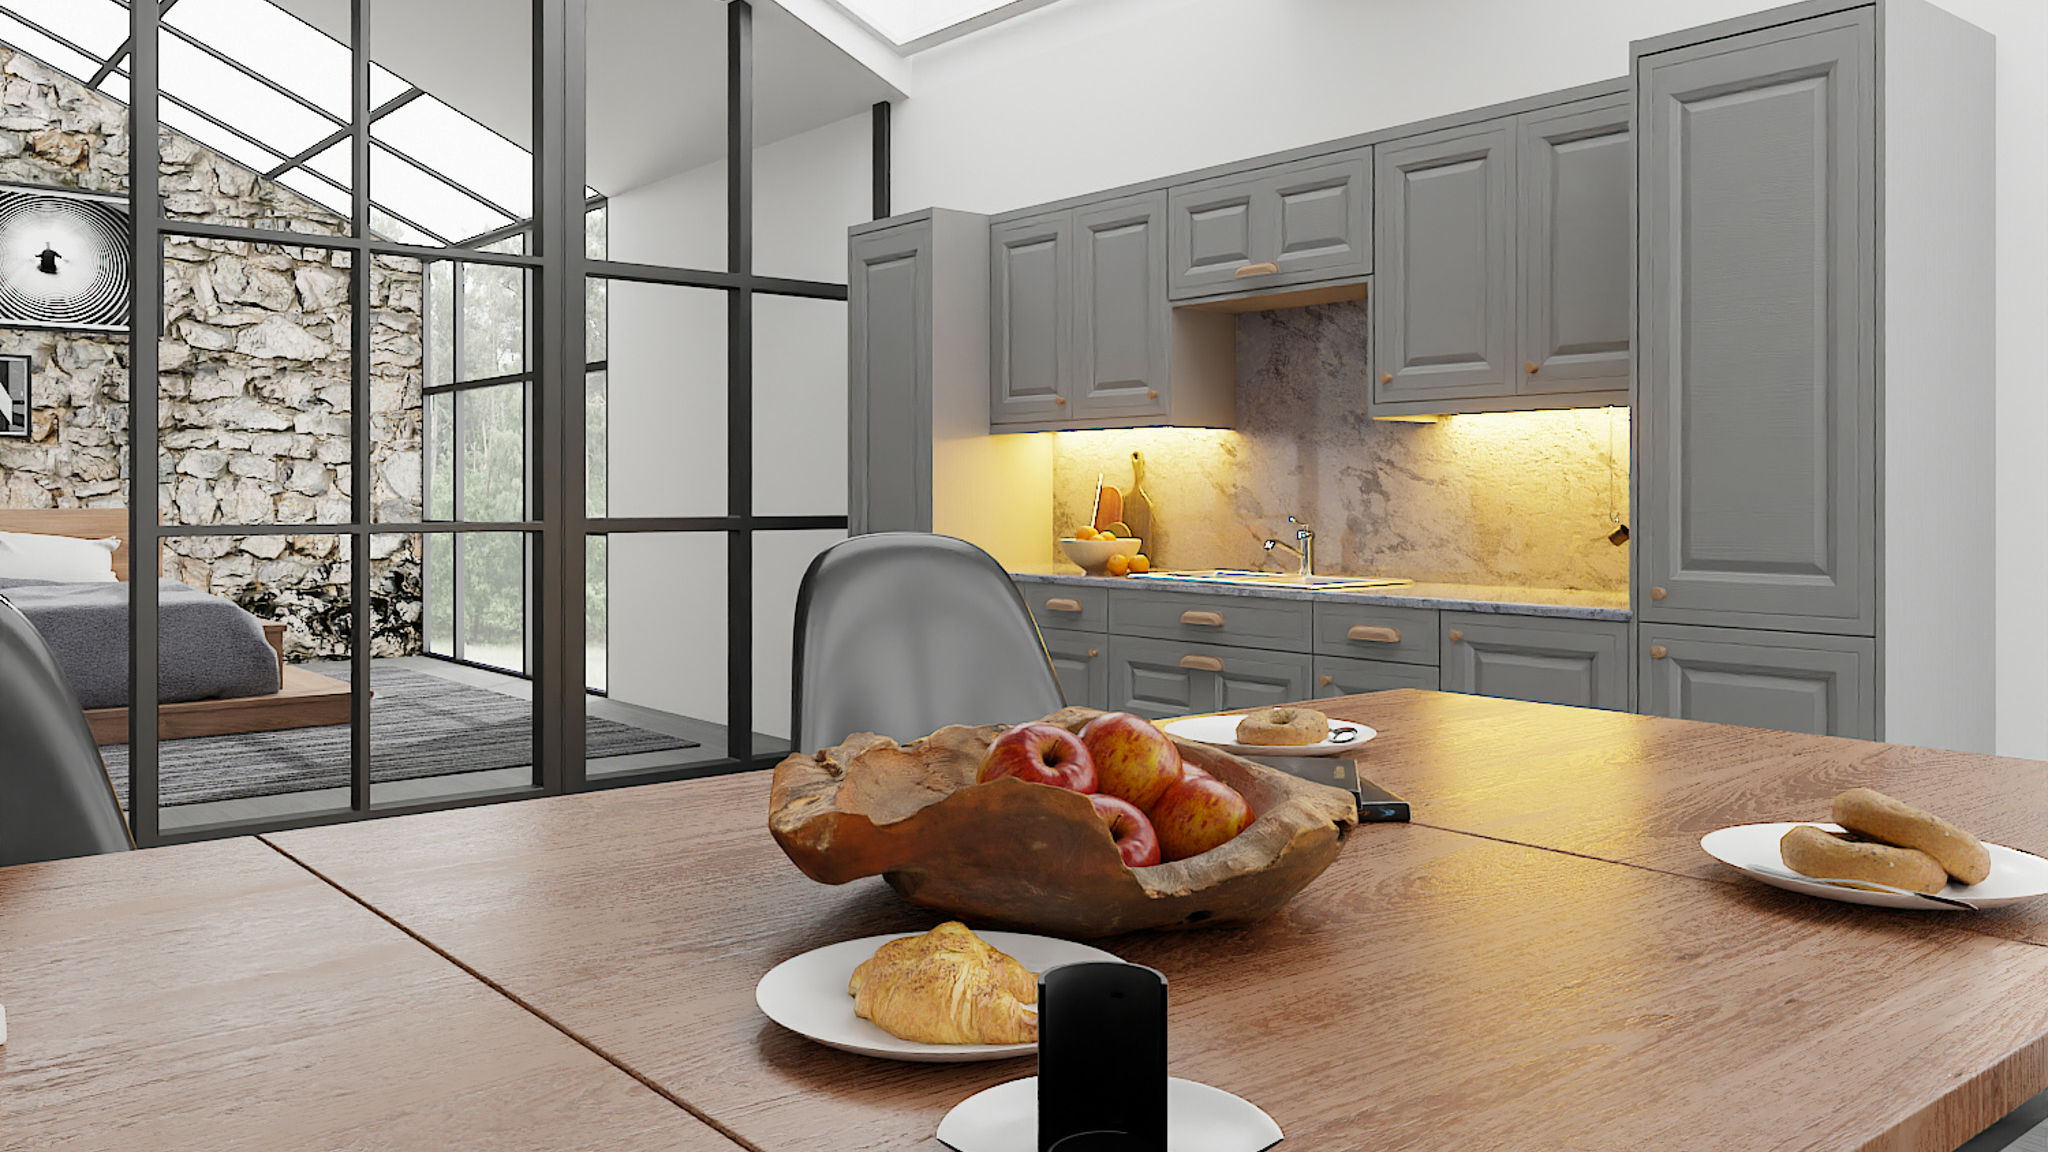 Mock inframe Jacobsen dust grey kitchens designed to give a tailored, built-in appearance in a deep grey hue